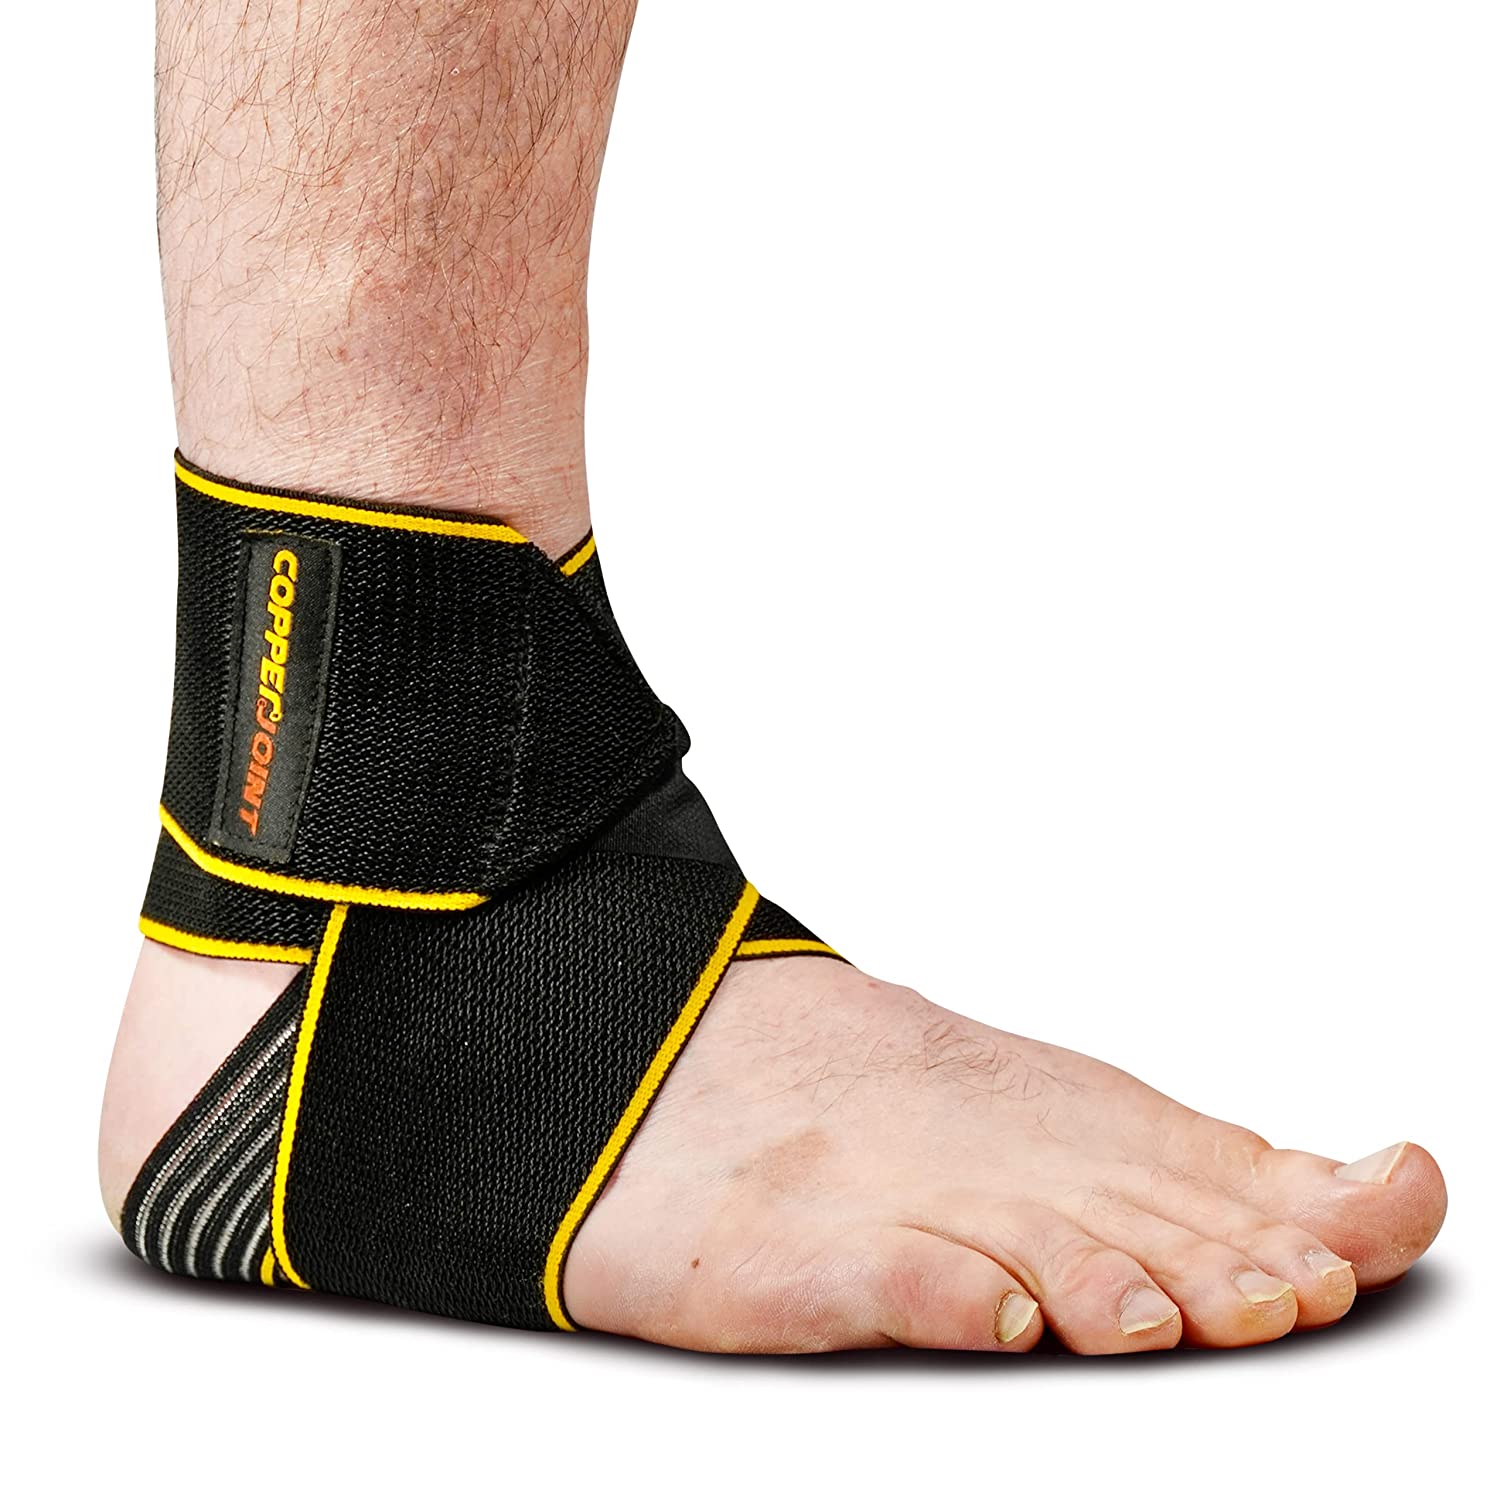 Ankle Compression Proves Popular Among Amazon Shoppers